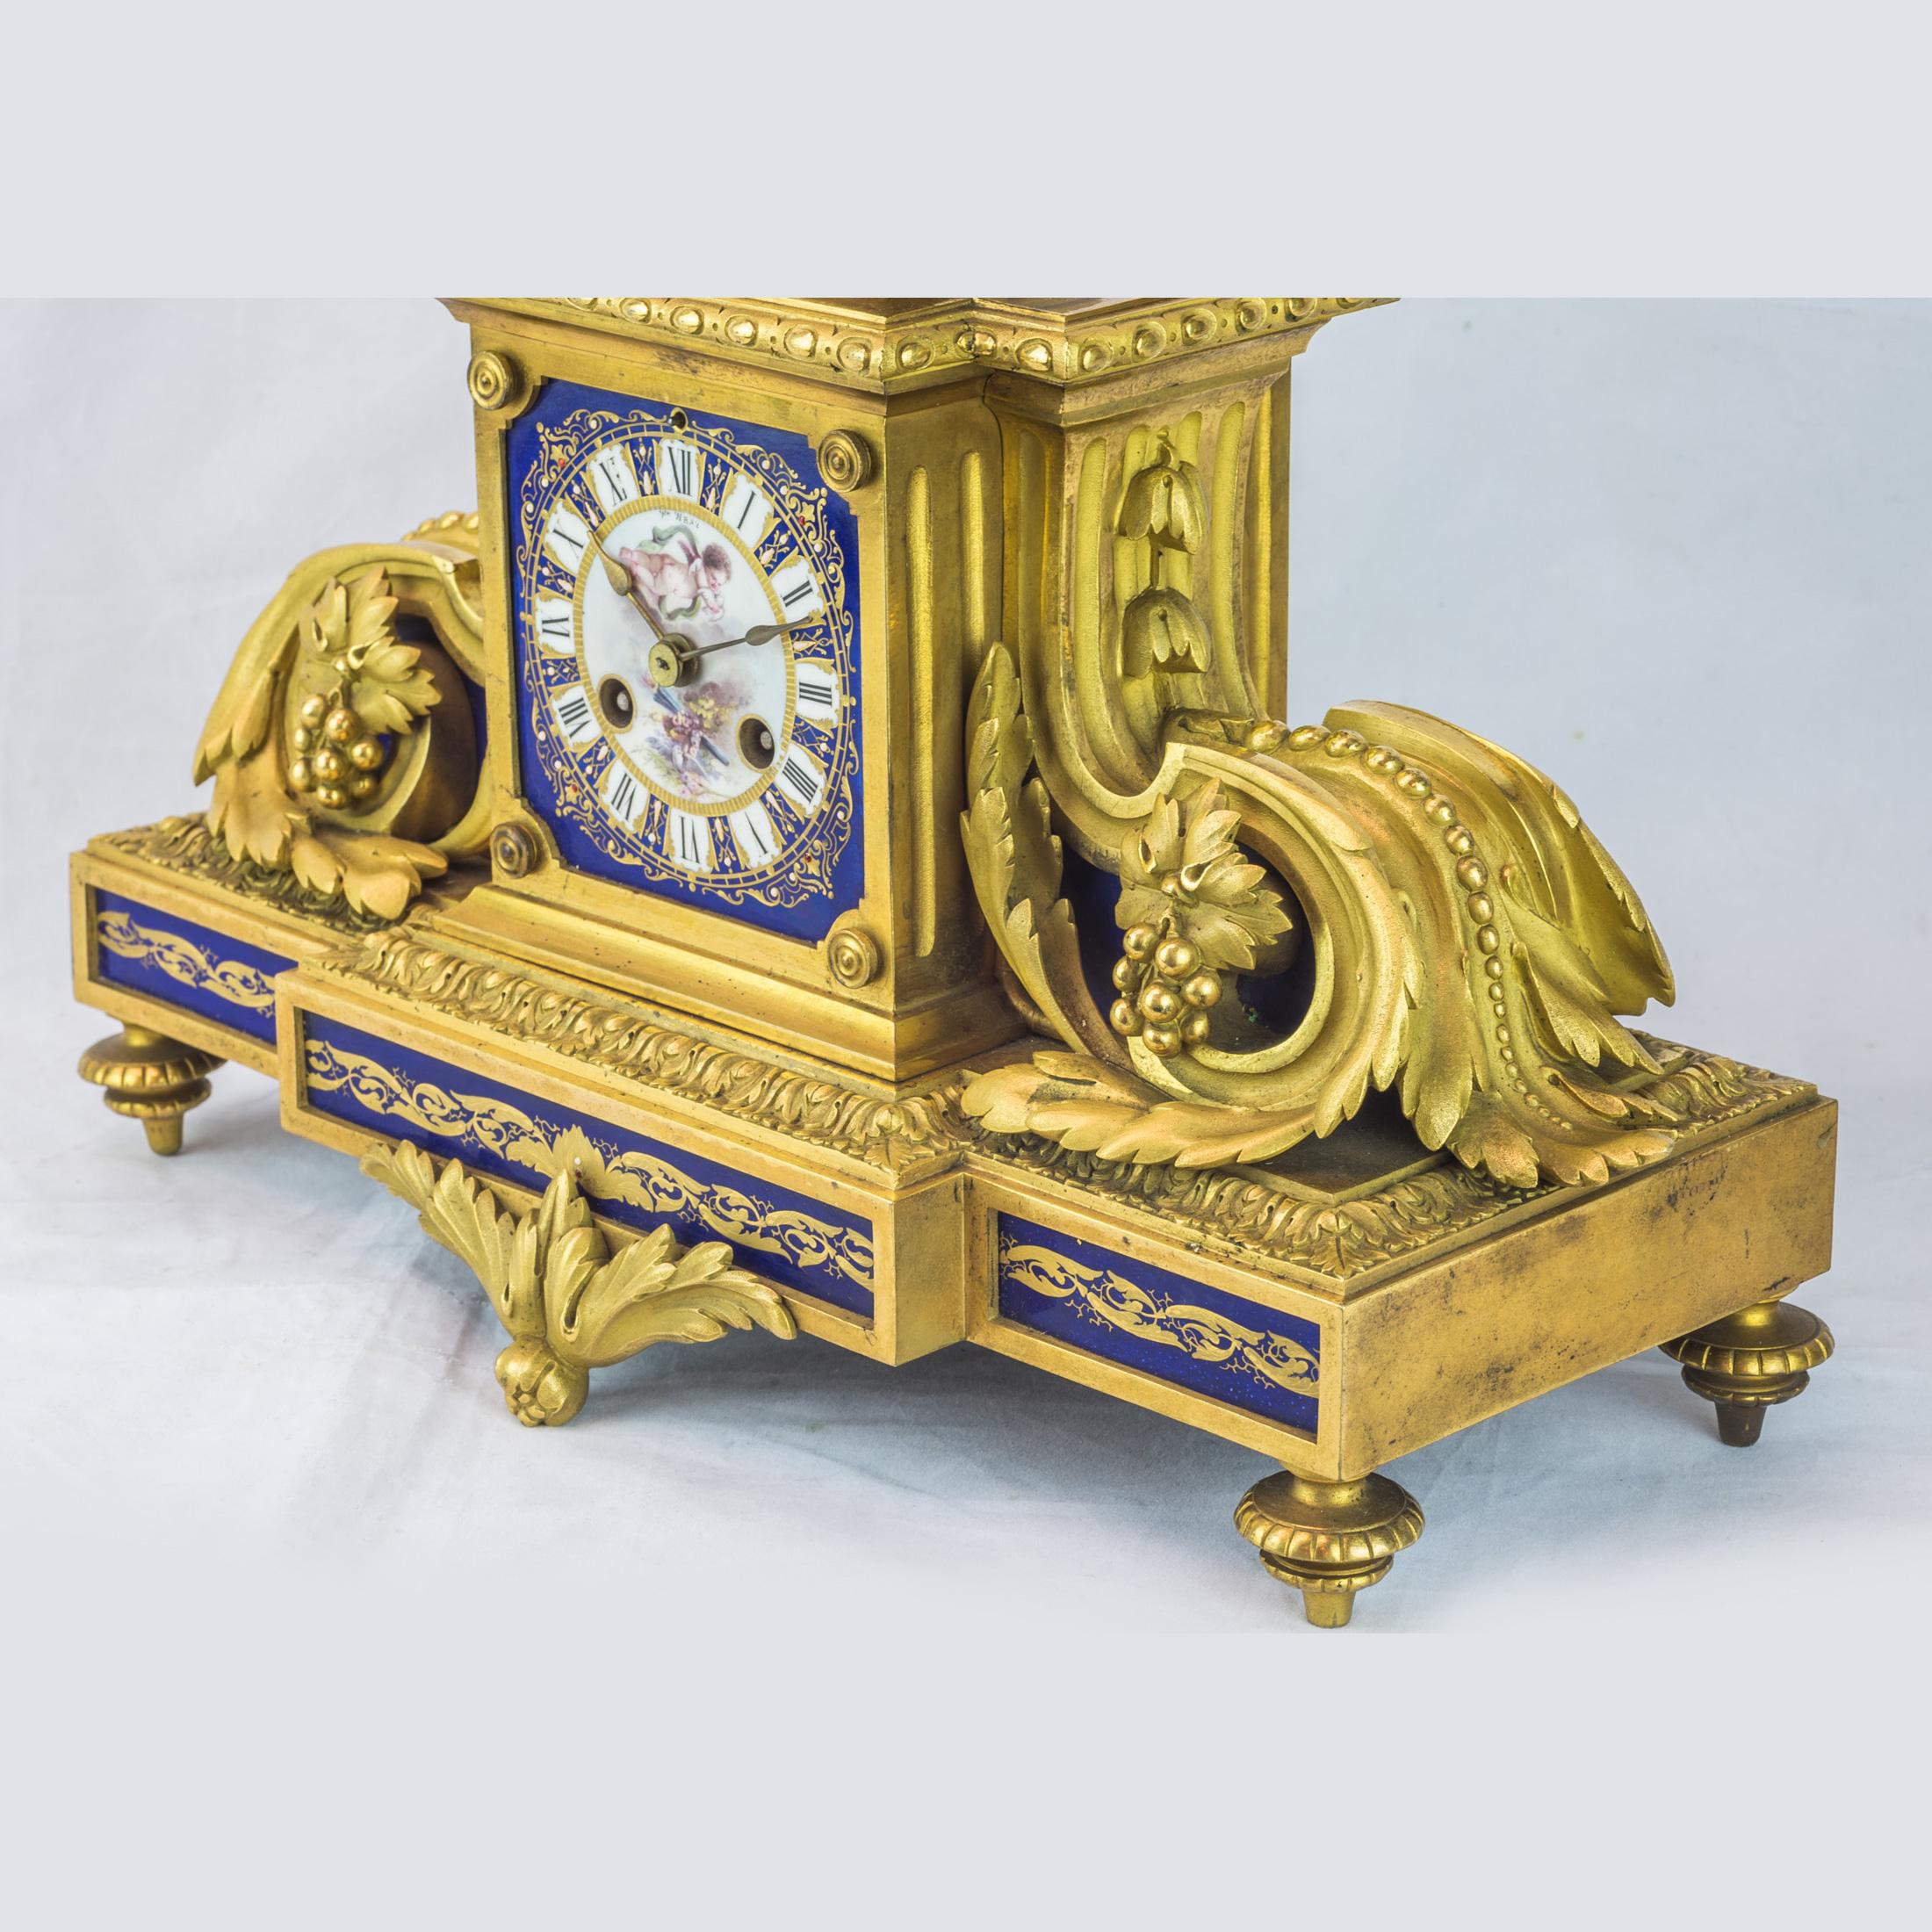 French 19th Century Sèvres Style Ormolu and Cobalt-Blue Painted Porcelain Clockset For Sale